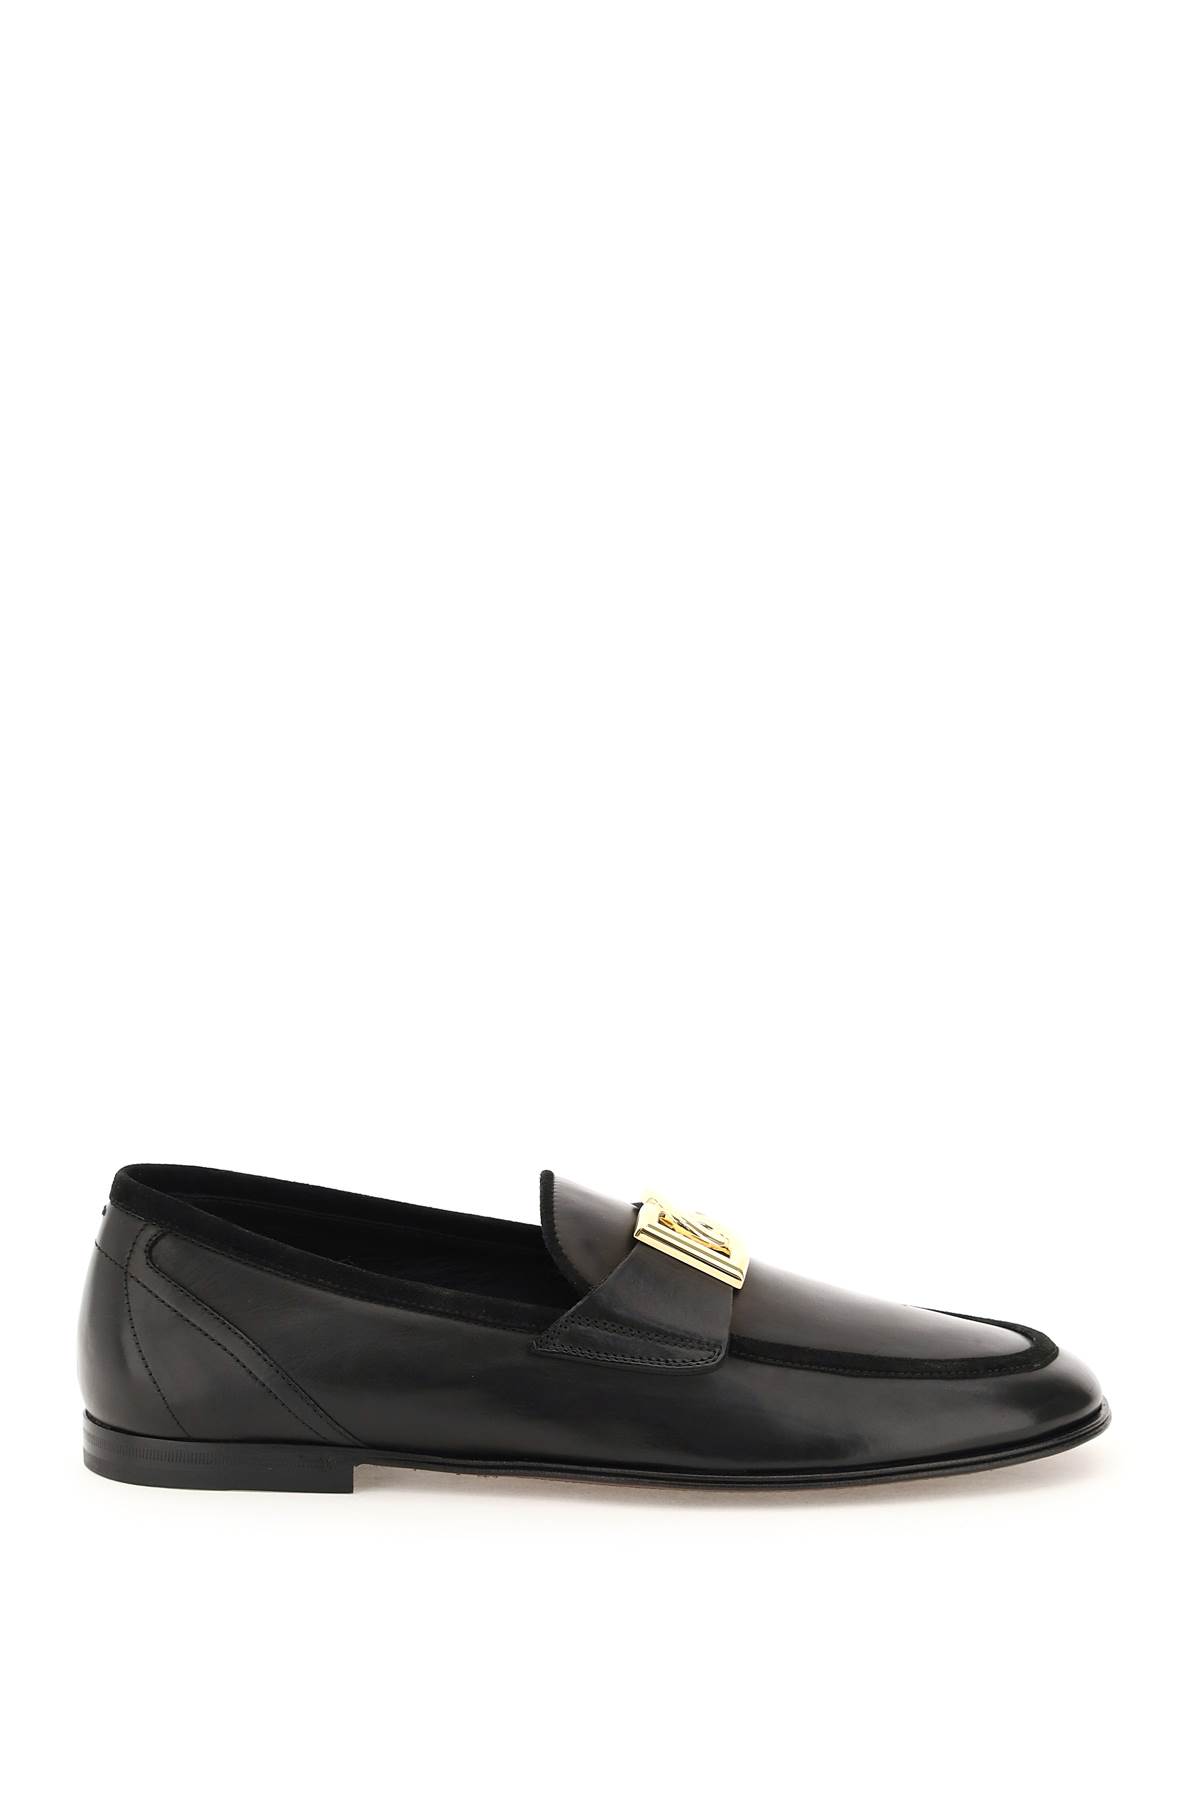 Dolce & Gabbana Leather Ariosto Slippers Loafers In Gray